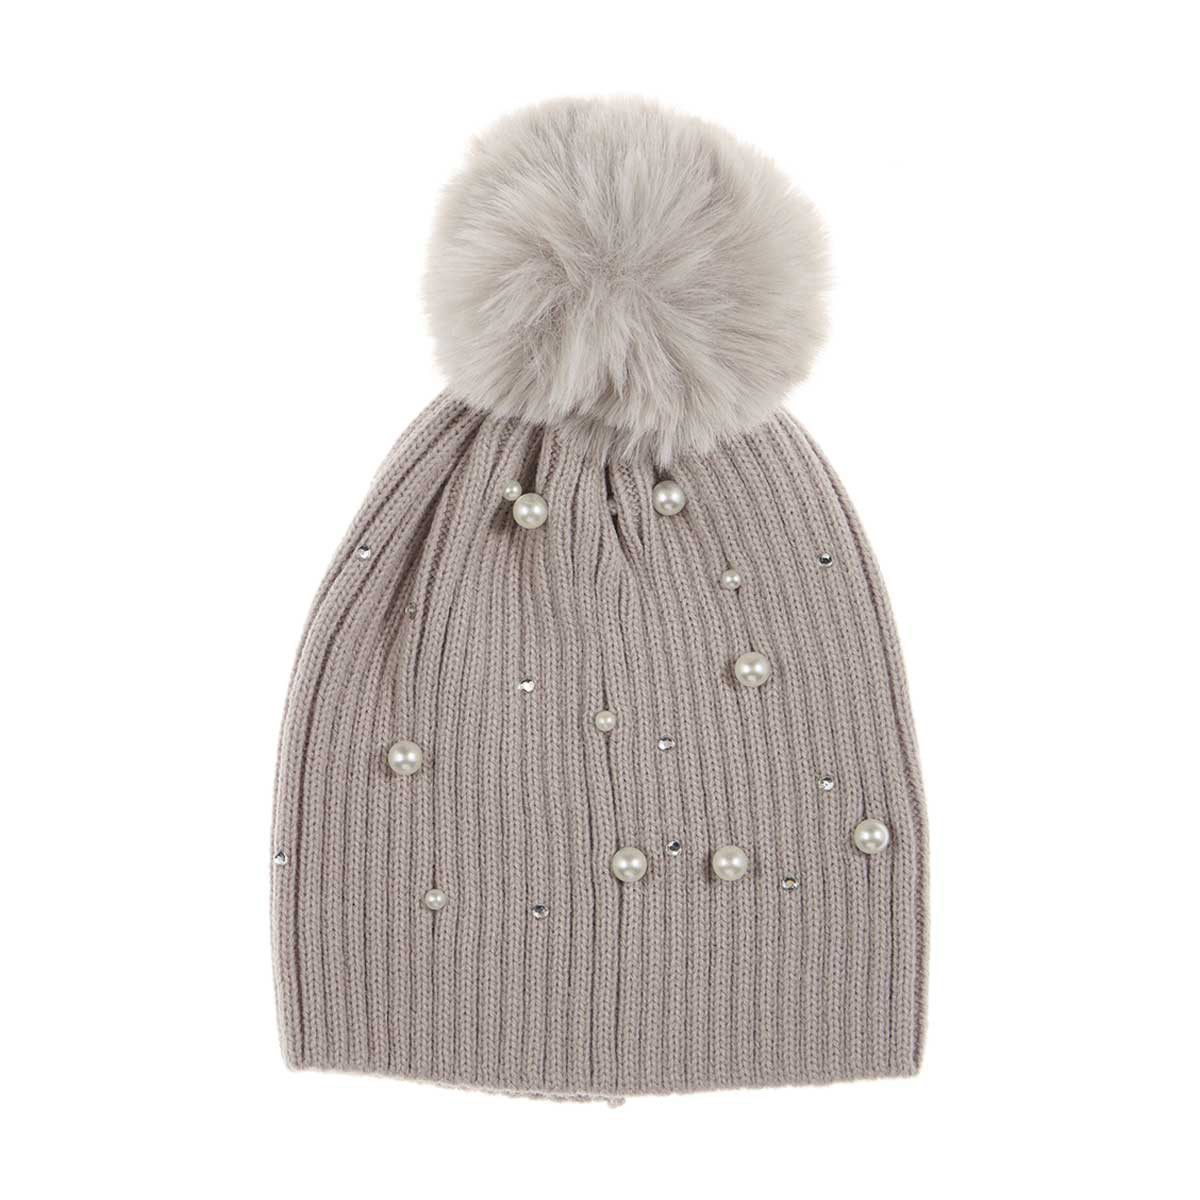 Embellished Beanie Winter Hat with Pom Pom, Taupe